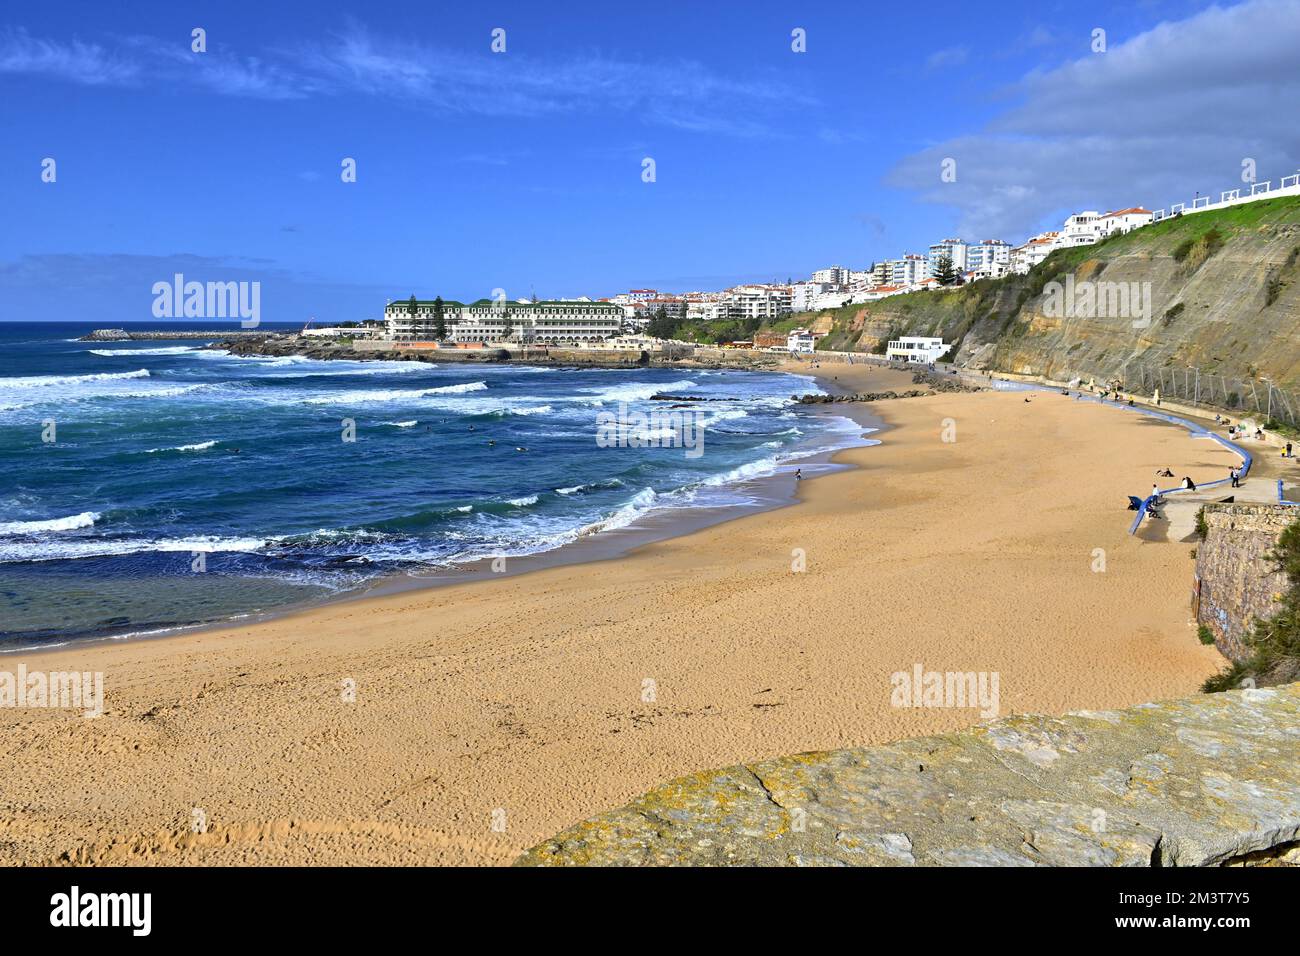 A scenic landscape of sandy Baleia beach and buildings in distance in Ericeira, Portugal on sunny day under blue sky Stock Photo